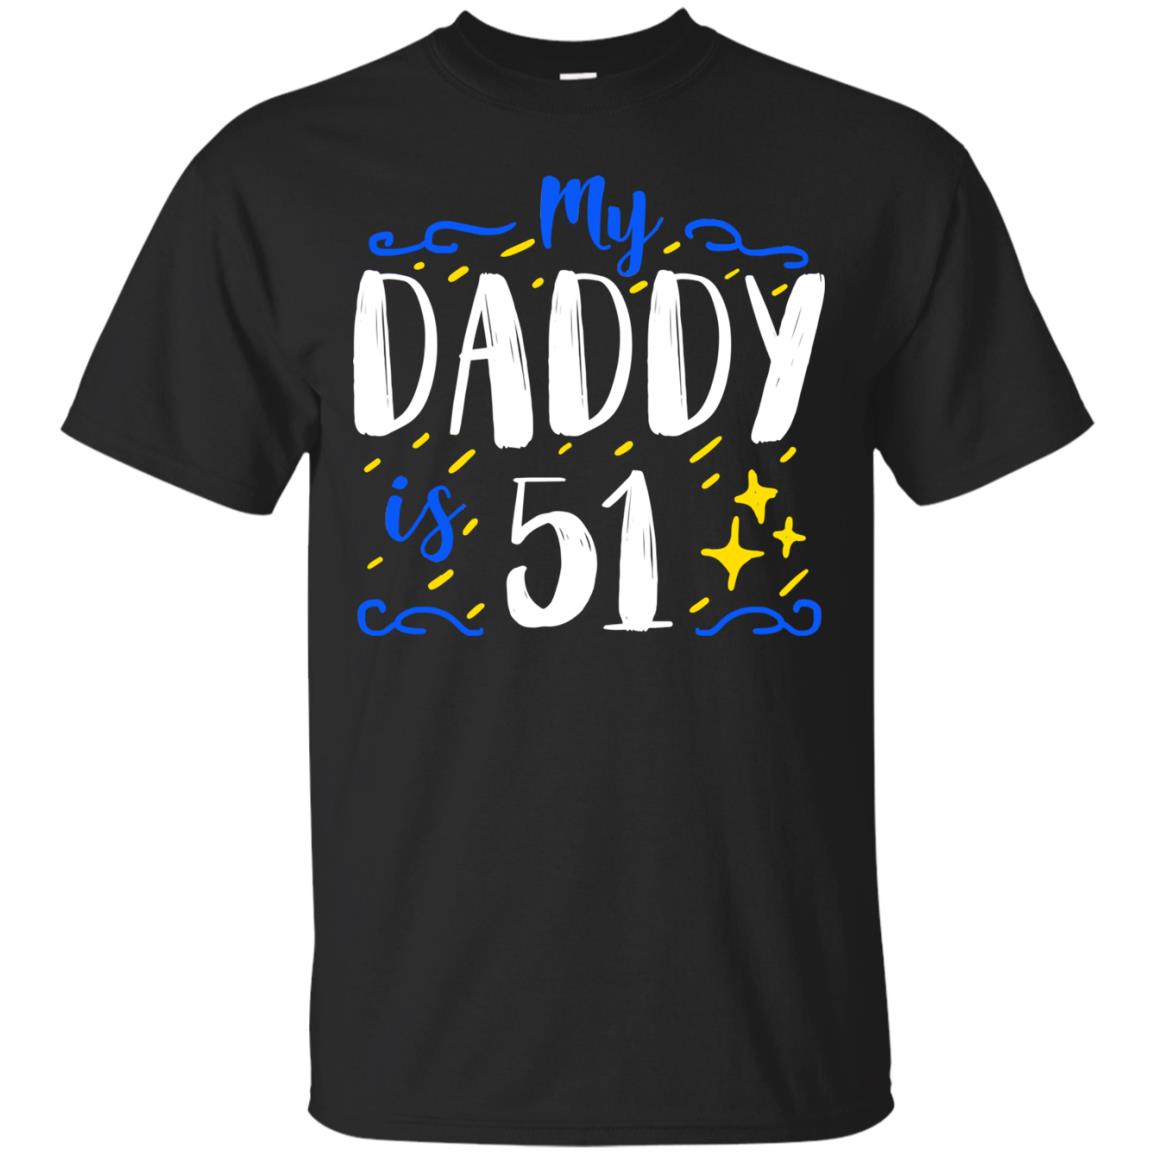 My Daddy Is 51 51st Birthday Daddy Shirt For Sons Or DaughtersG200 Gildan Ultra Cotton T-Shirt